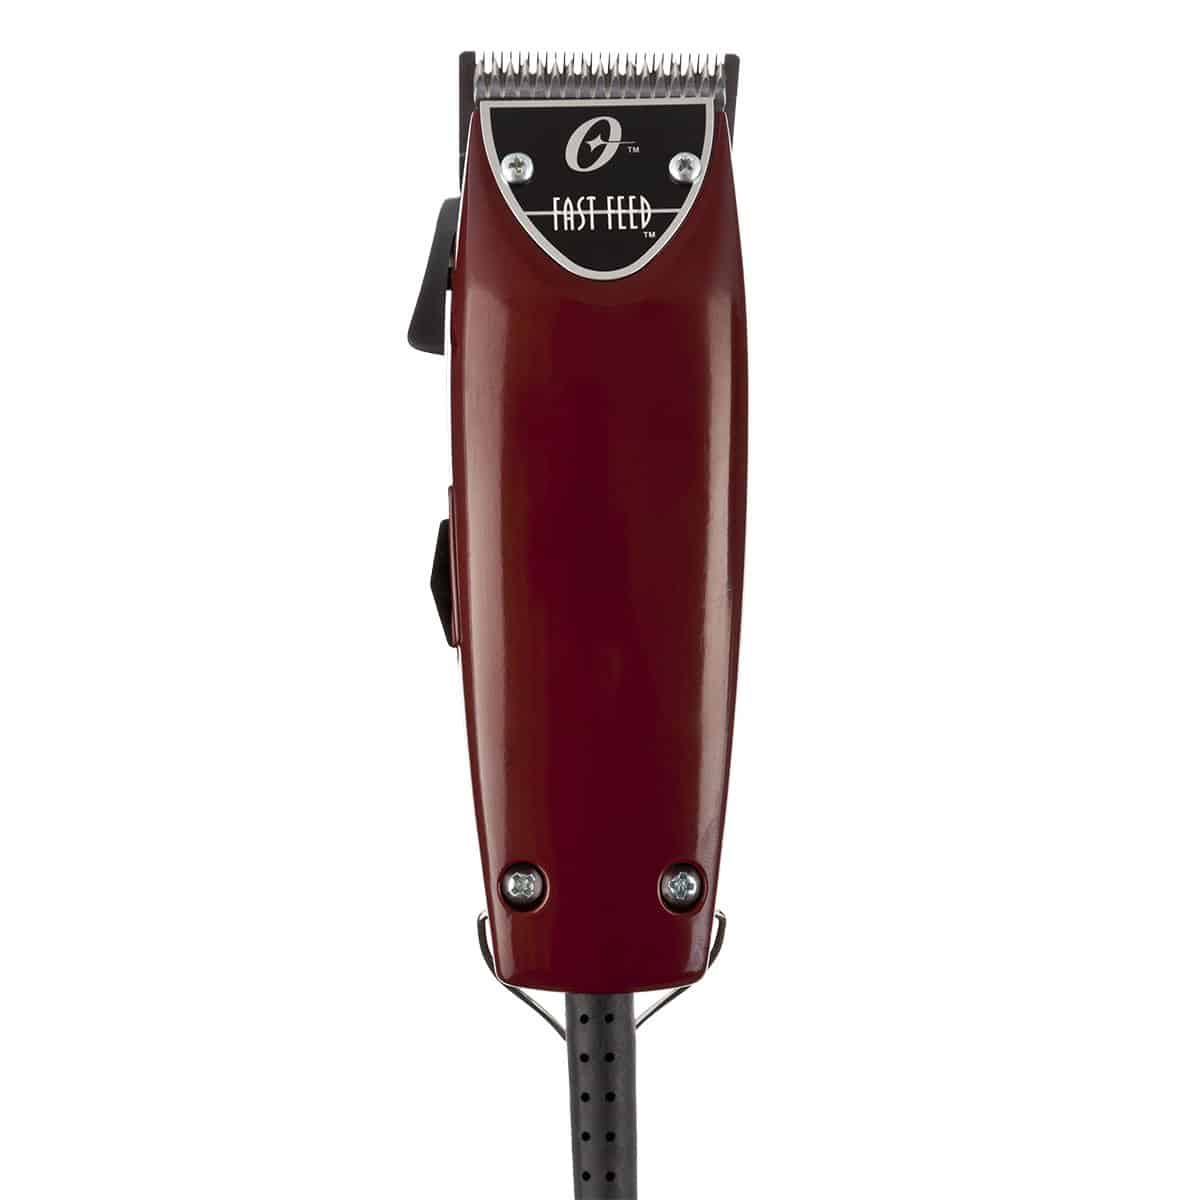 One of the best barber clippers, Oster Fasr Feed Adjustable Pivot Motor Clipper